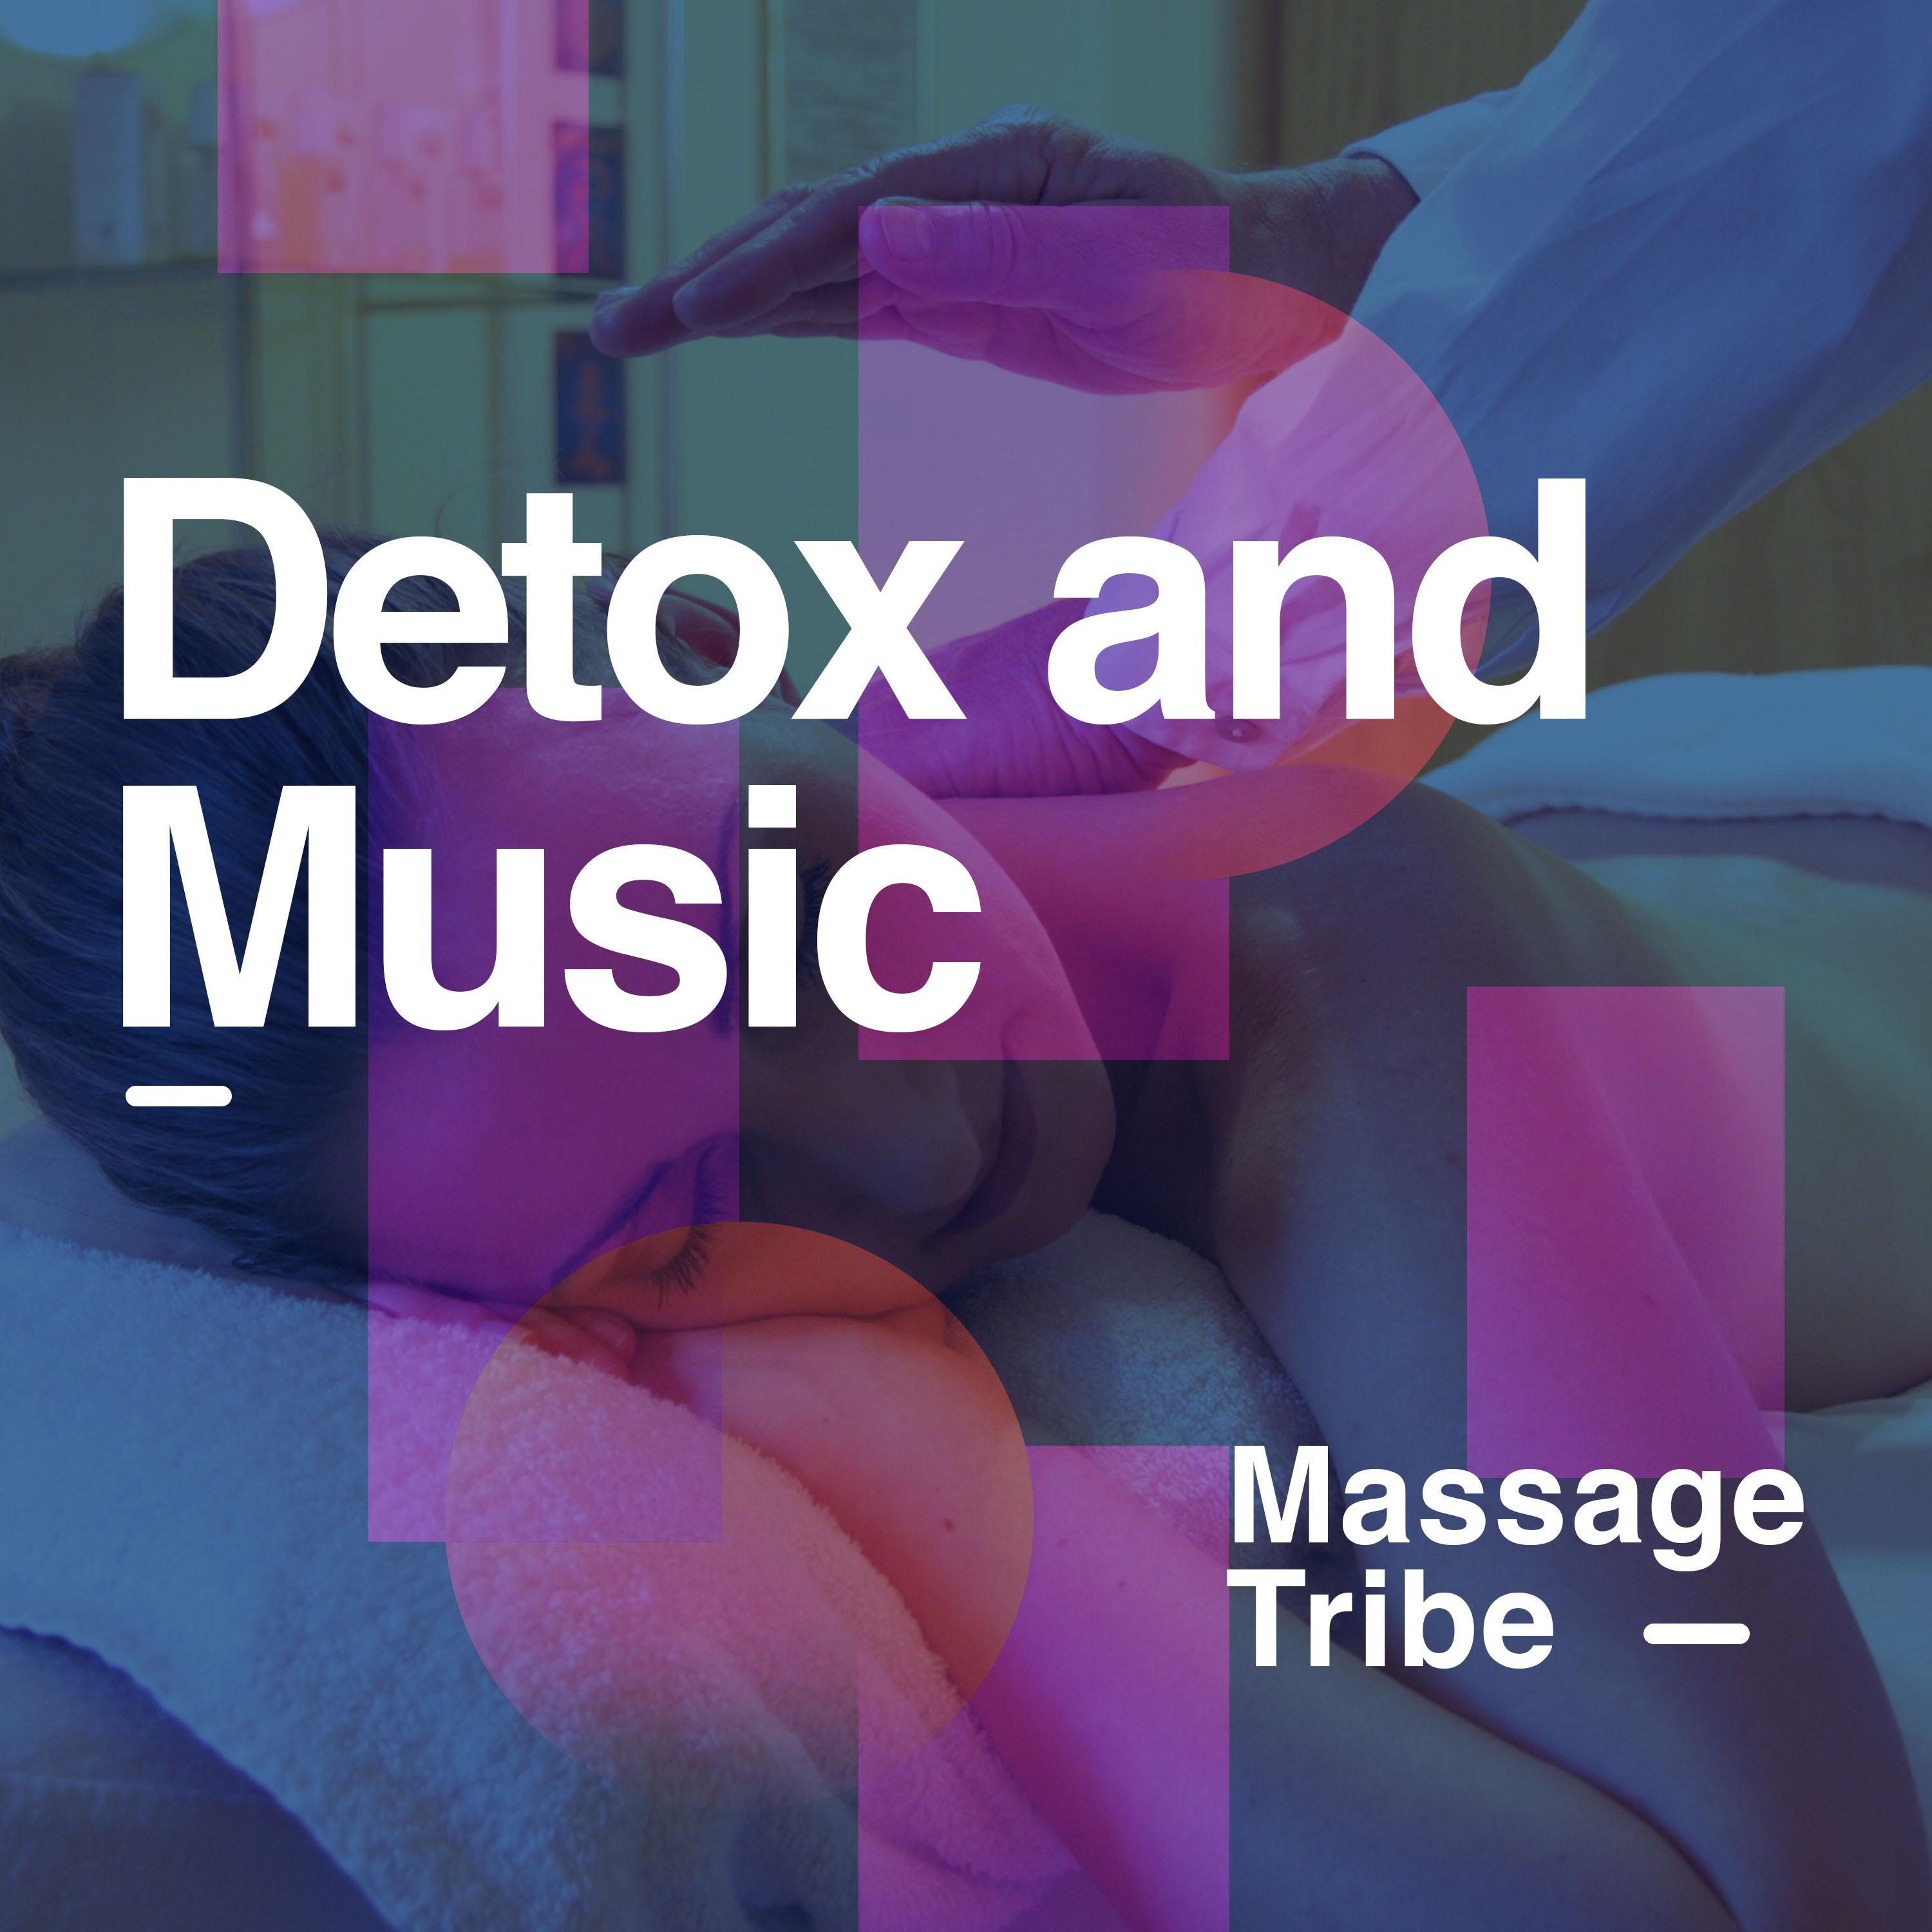 Detox and Music